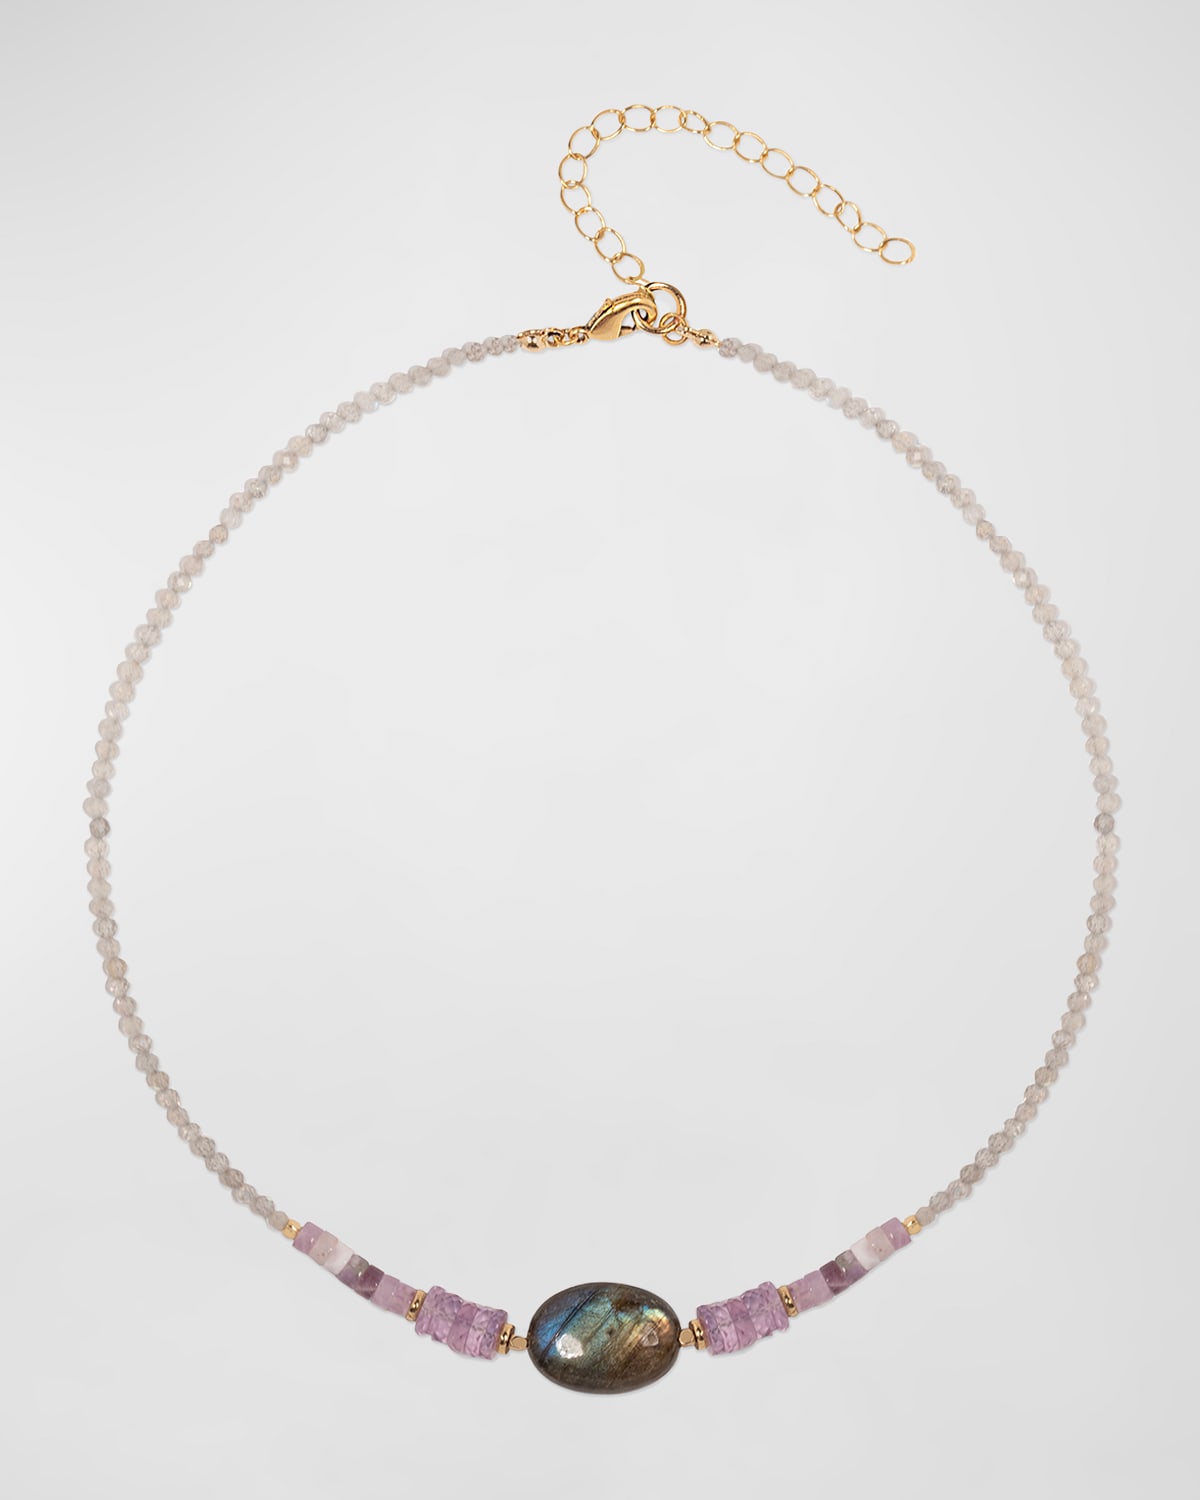 Sequin Beaded Labradorite, Lepidolite And Amethyst Necklace In Multi